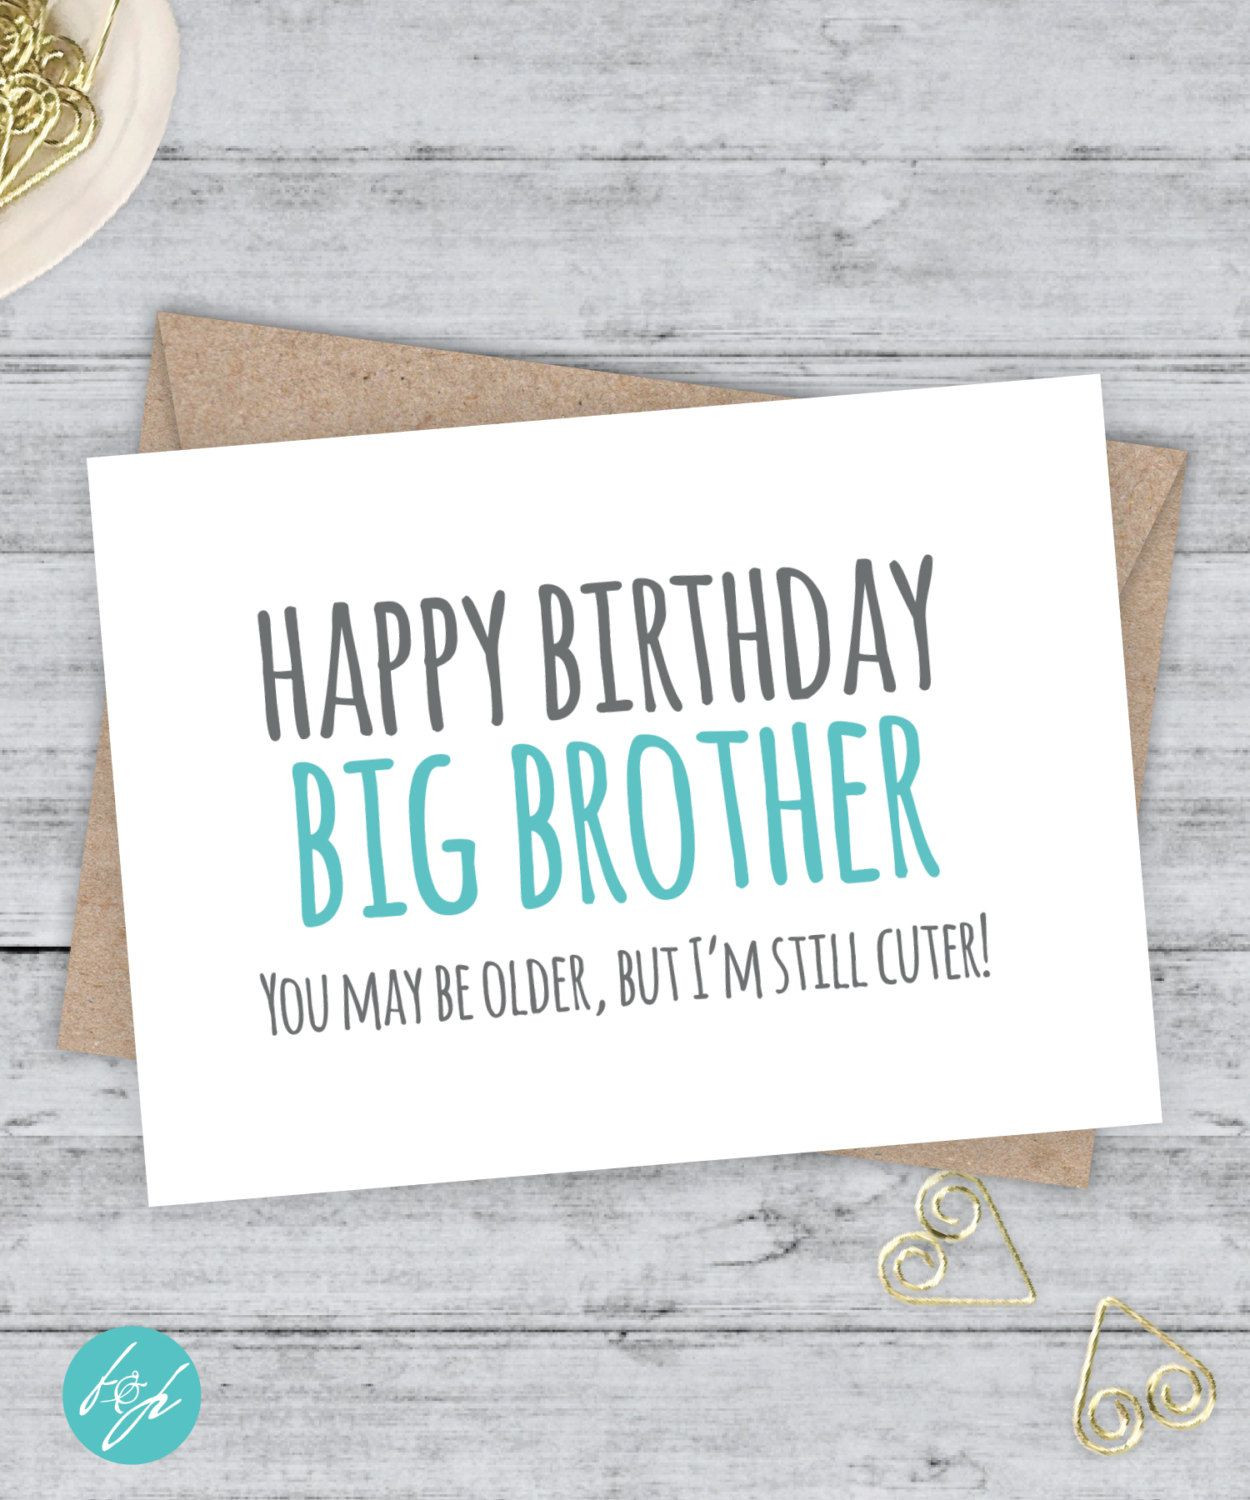 Birthday Wishes To Brother From Sister
 45 Inspirational Birthday Wishes For Brother From Sister